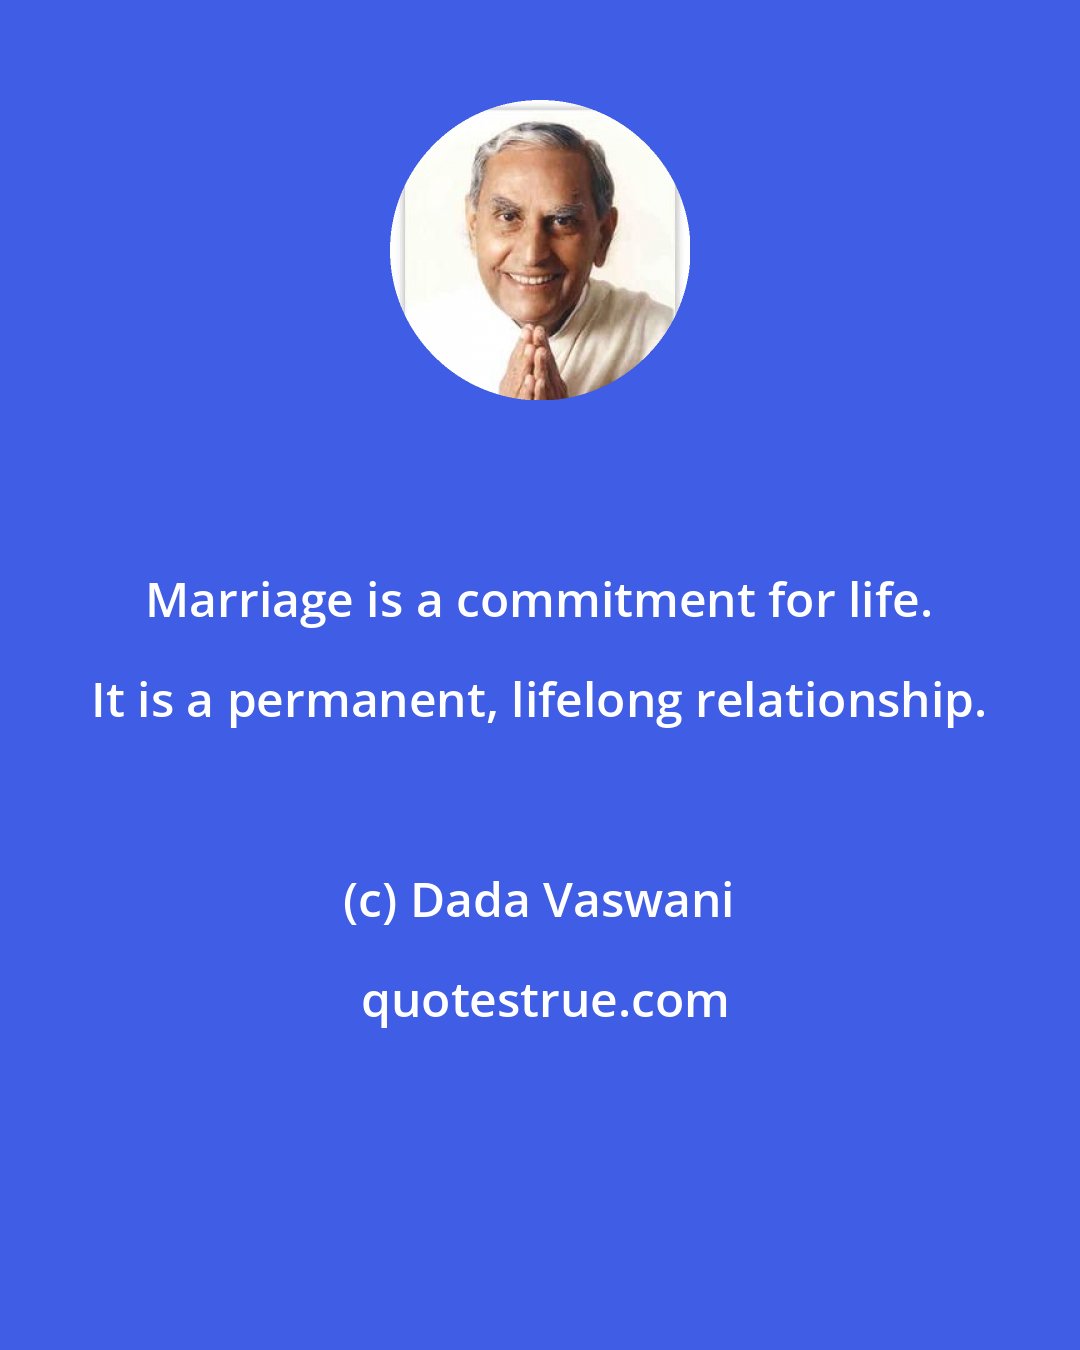 Dada Vaswani: Marriage is a commitment for life. It is a permanent, lifelong relationship.